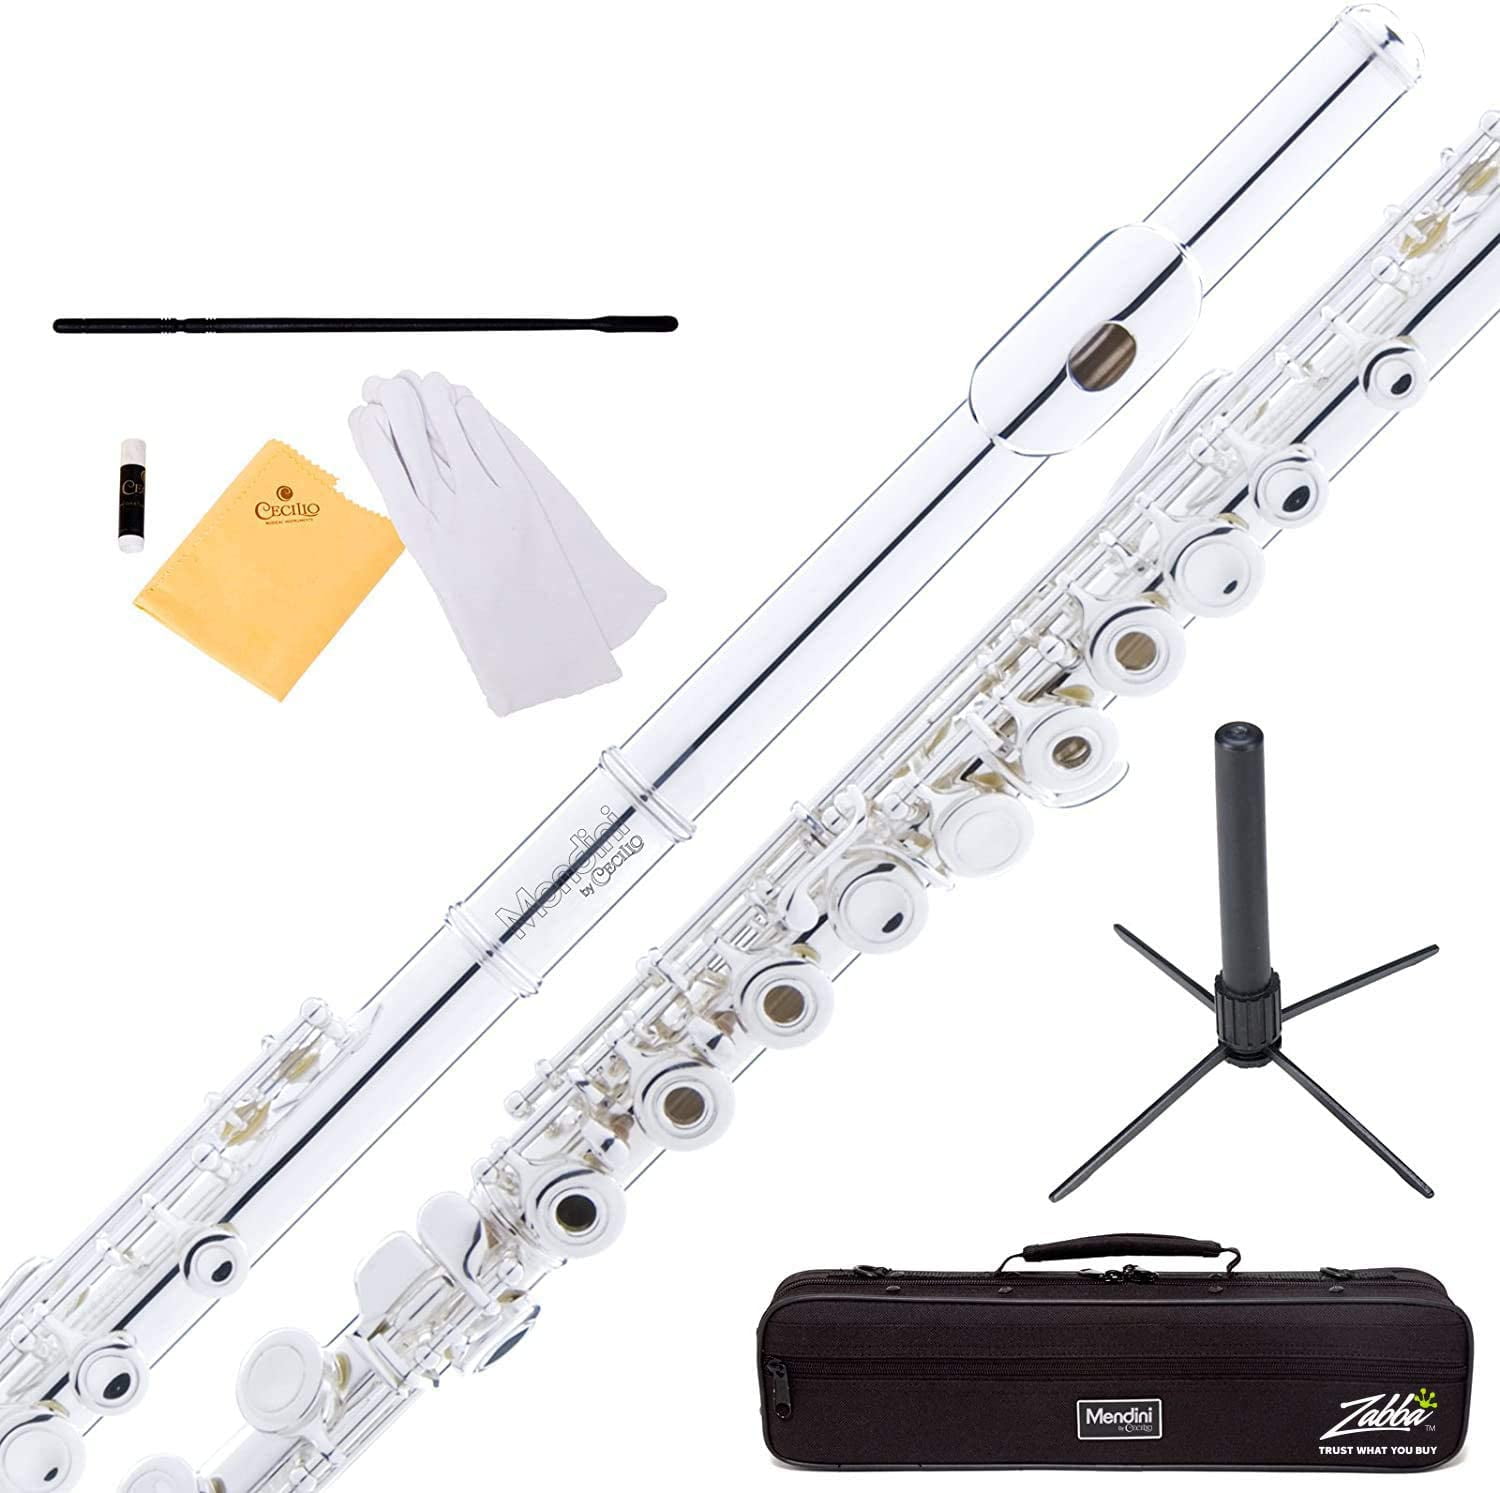 MFE-22S+SD+PB Stand Pocketbook and Deluxe Case Mendini by Cecilio Silver Plated Open Hole C Flute with Italian Pads